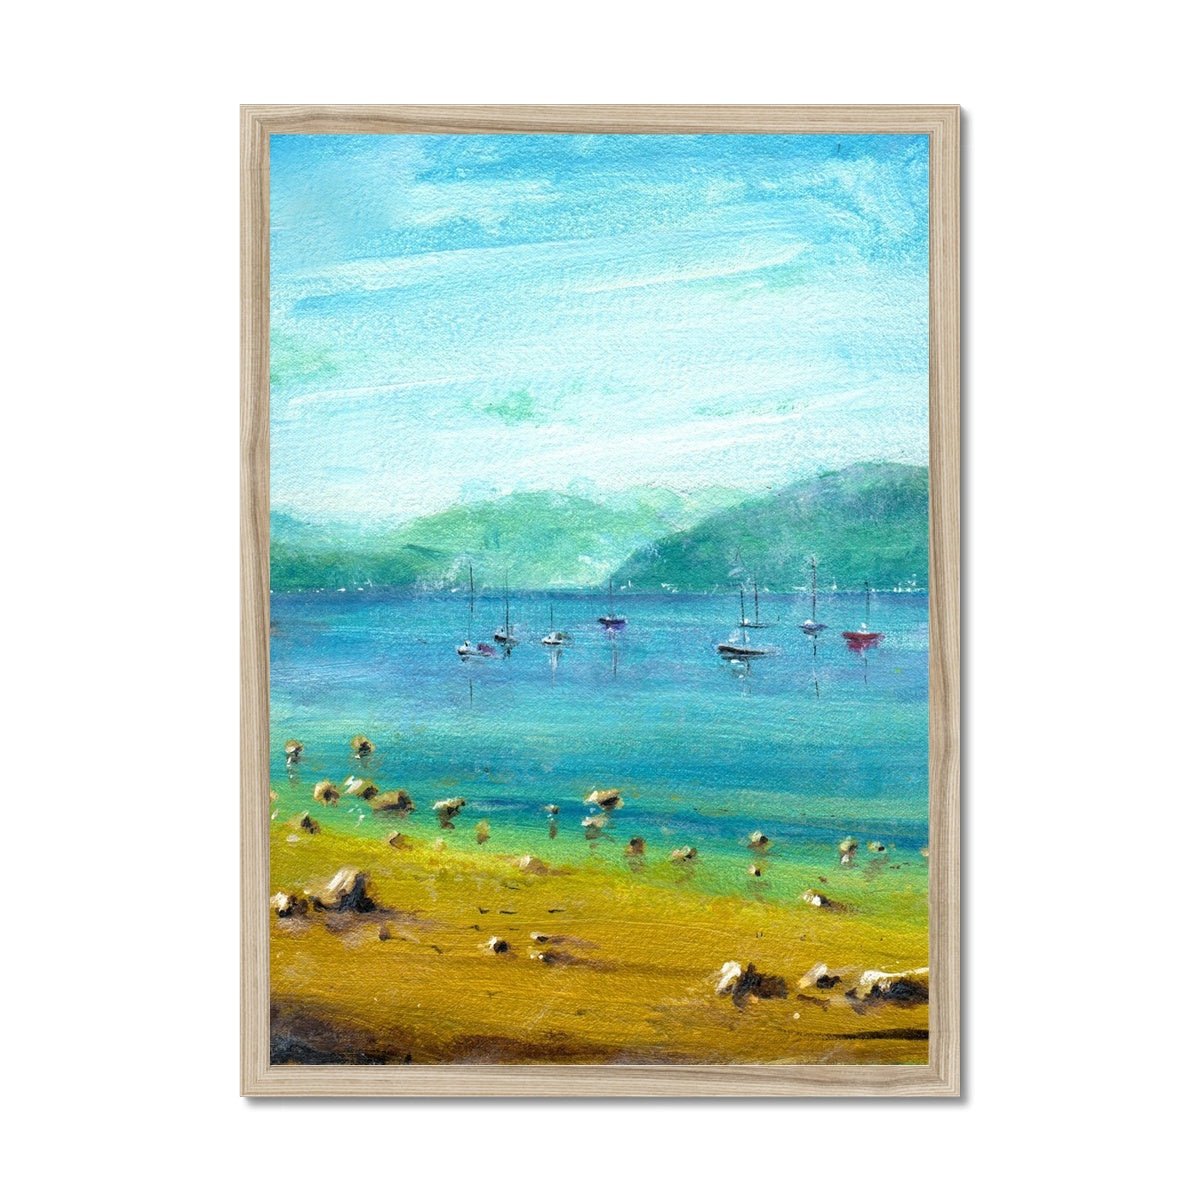 A Summer Day On The Clyde Painting | Framed Prints From Scotland-Framed Prints-River Clyde Art Gallery-A2 Portrait-Natural Frame-Paintings, Prints, Homeware, Art Gifts From Scotland By Scottish Artist Kevin Hunter